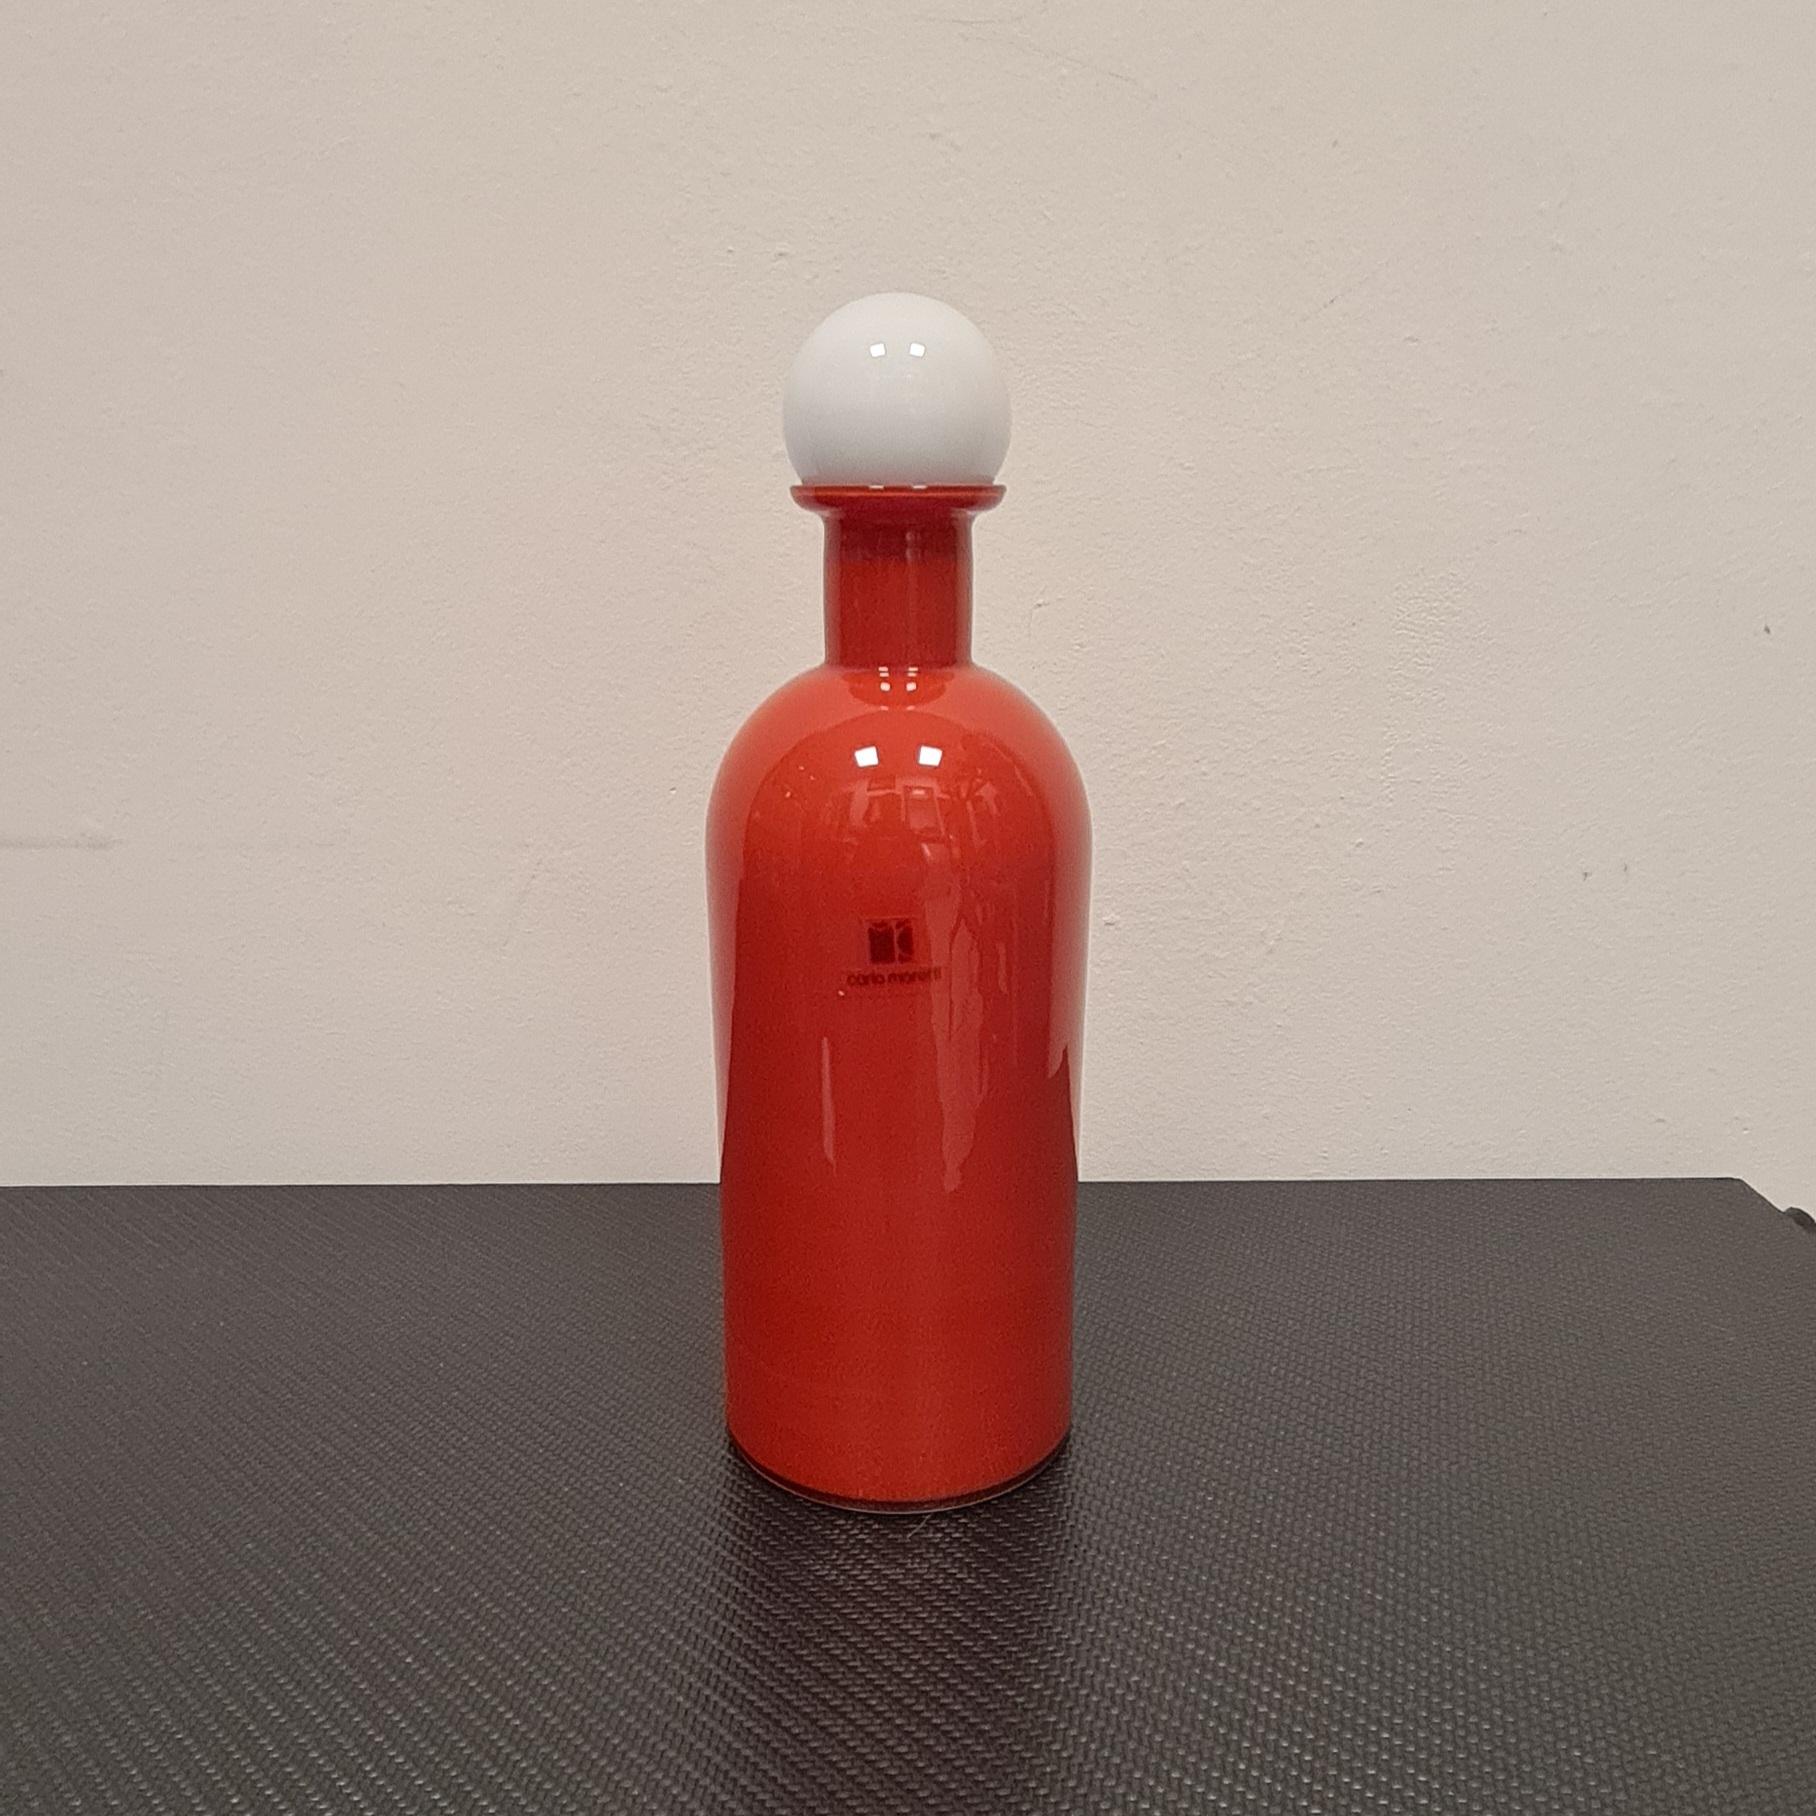 Murano glass bottle from the Carlo Moretti glassworks.

Carlo Moretti founded his eponymous glassworks in 1958 in Murano with his brother Giovanni.

Throughout its history Moretti Glassworks has had numerous collaborations including one with a very